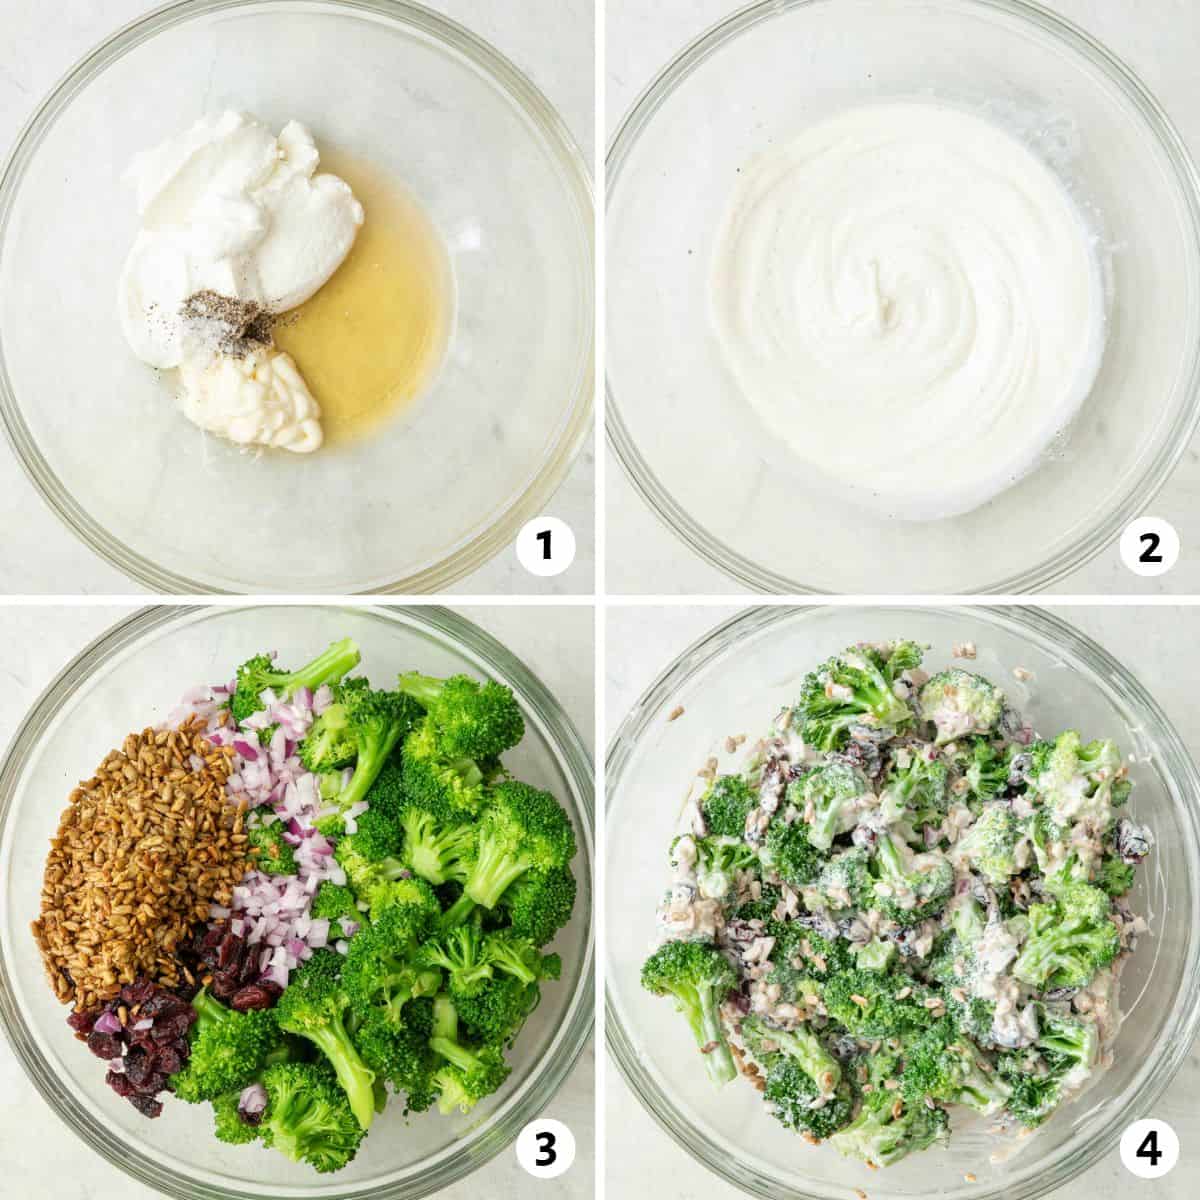 4 image collage making recipe: 1- dressing ingredients in a bowl, 2- after combining, 3- salad ingredients added on top of dressing, 4- after fully combined.